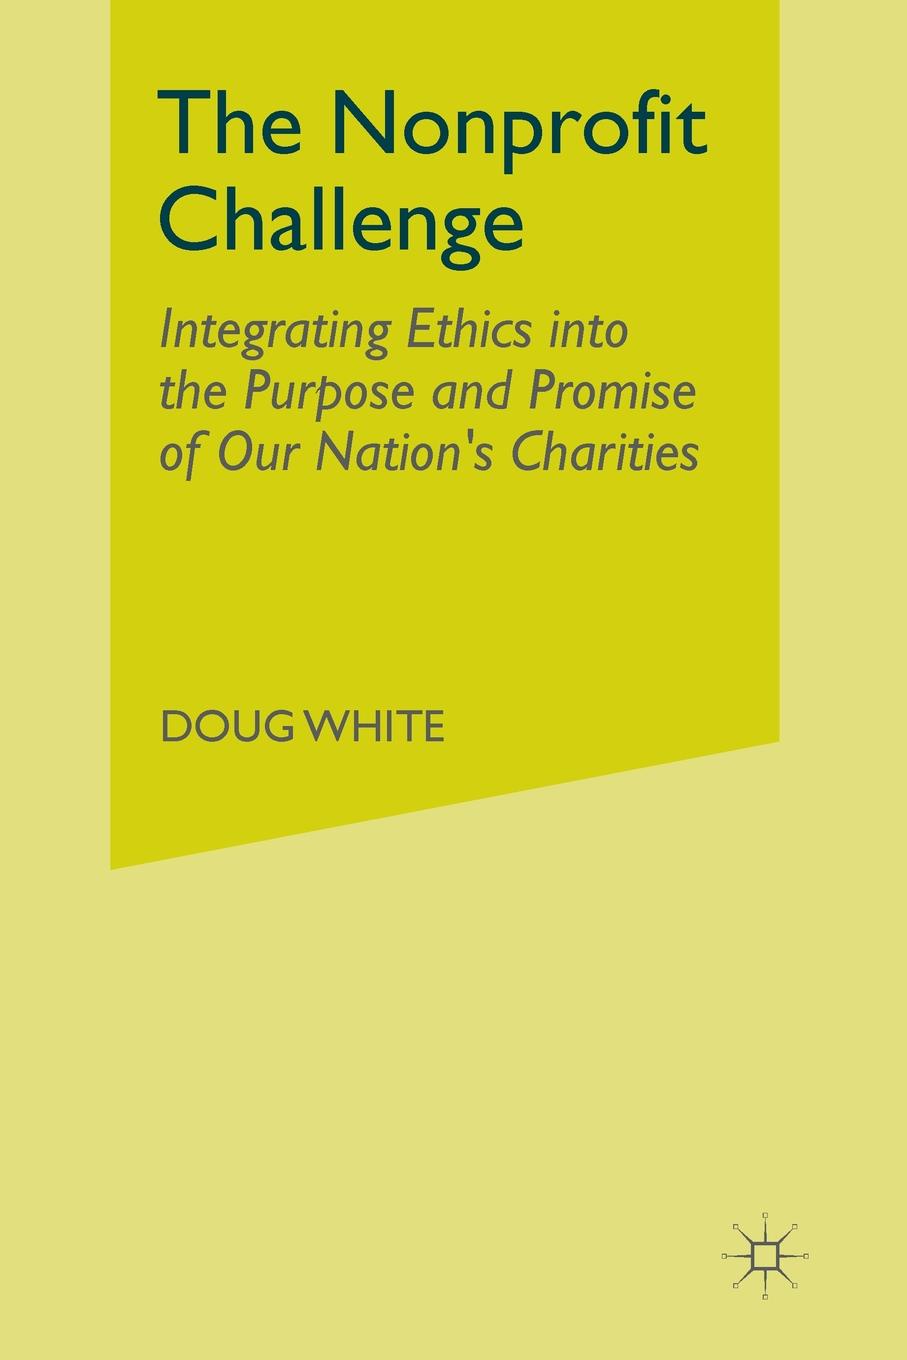 The Nonprofit Challenge. Integrating Ethics into the Purpose and Promise of Our Nation`s Charities